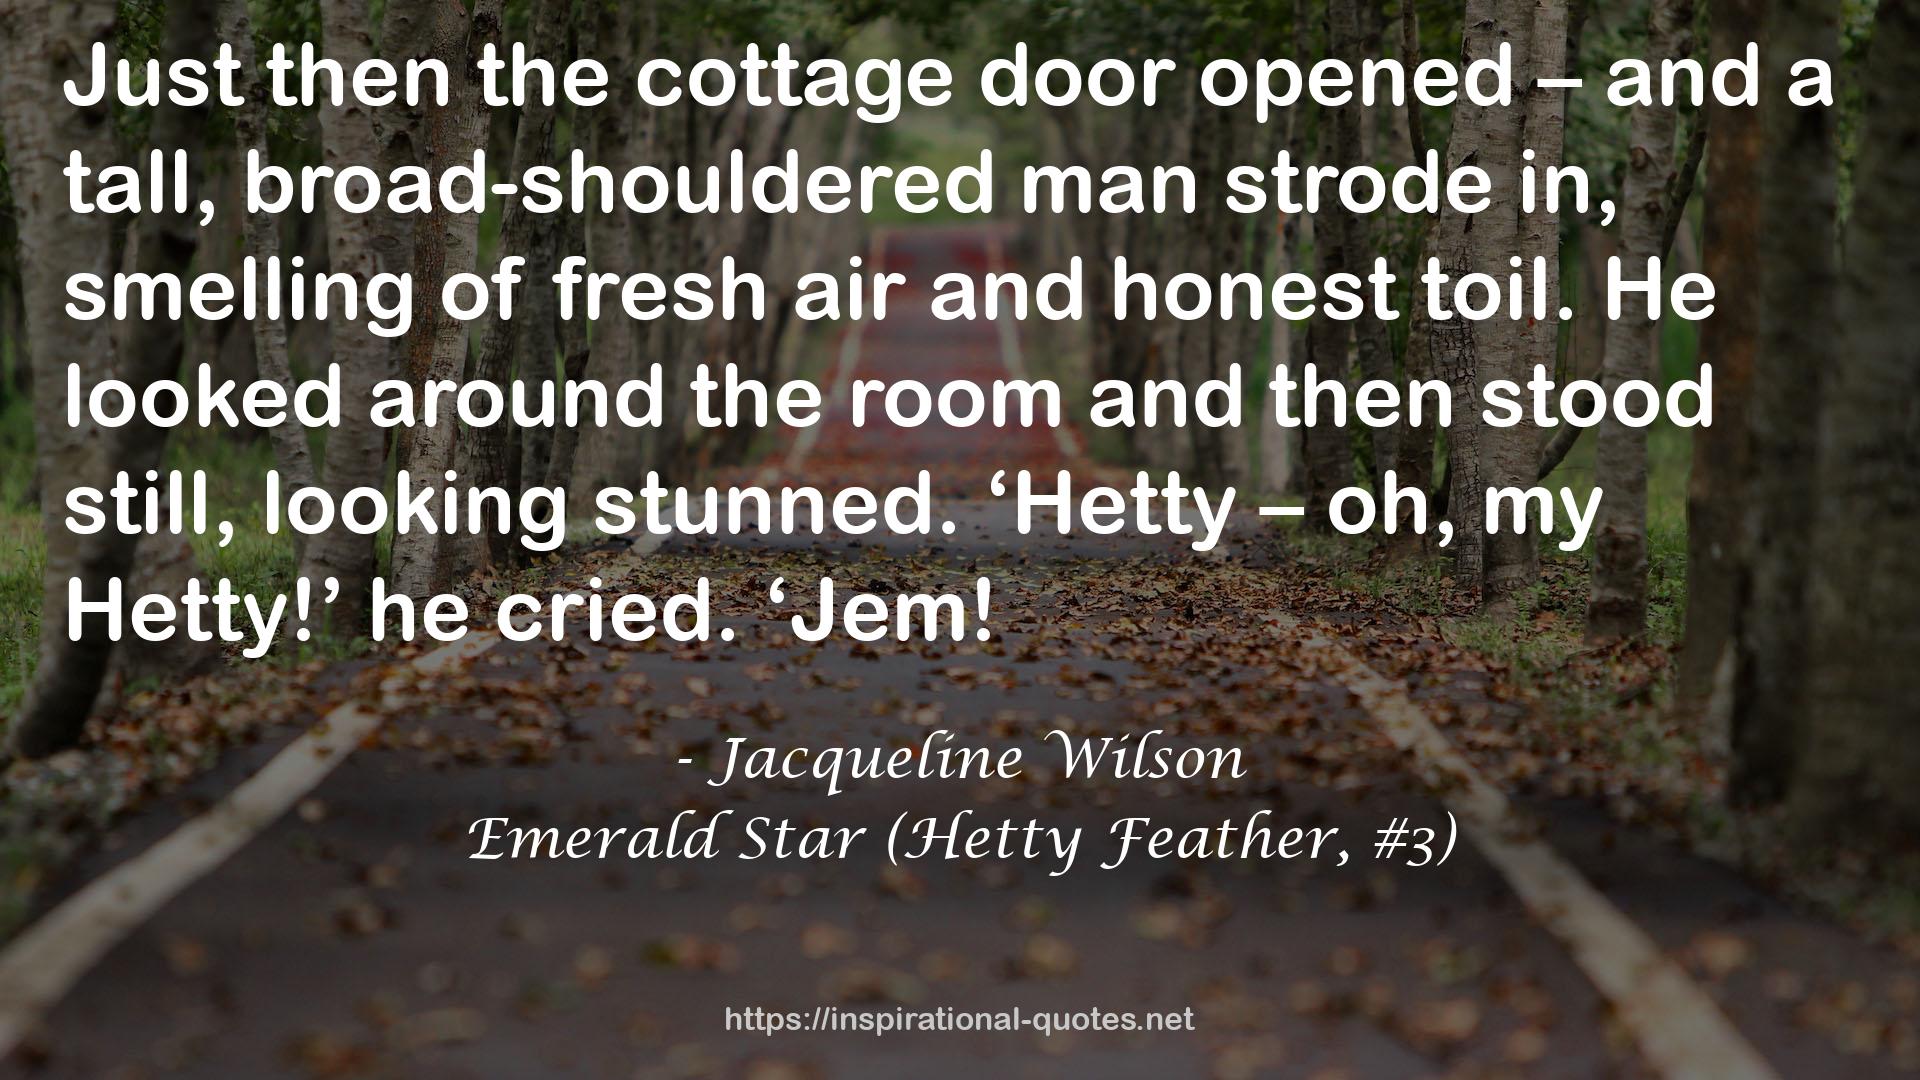 Emerald Star (Hetty Feather, #3) QUOTES